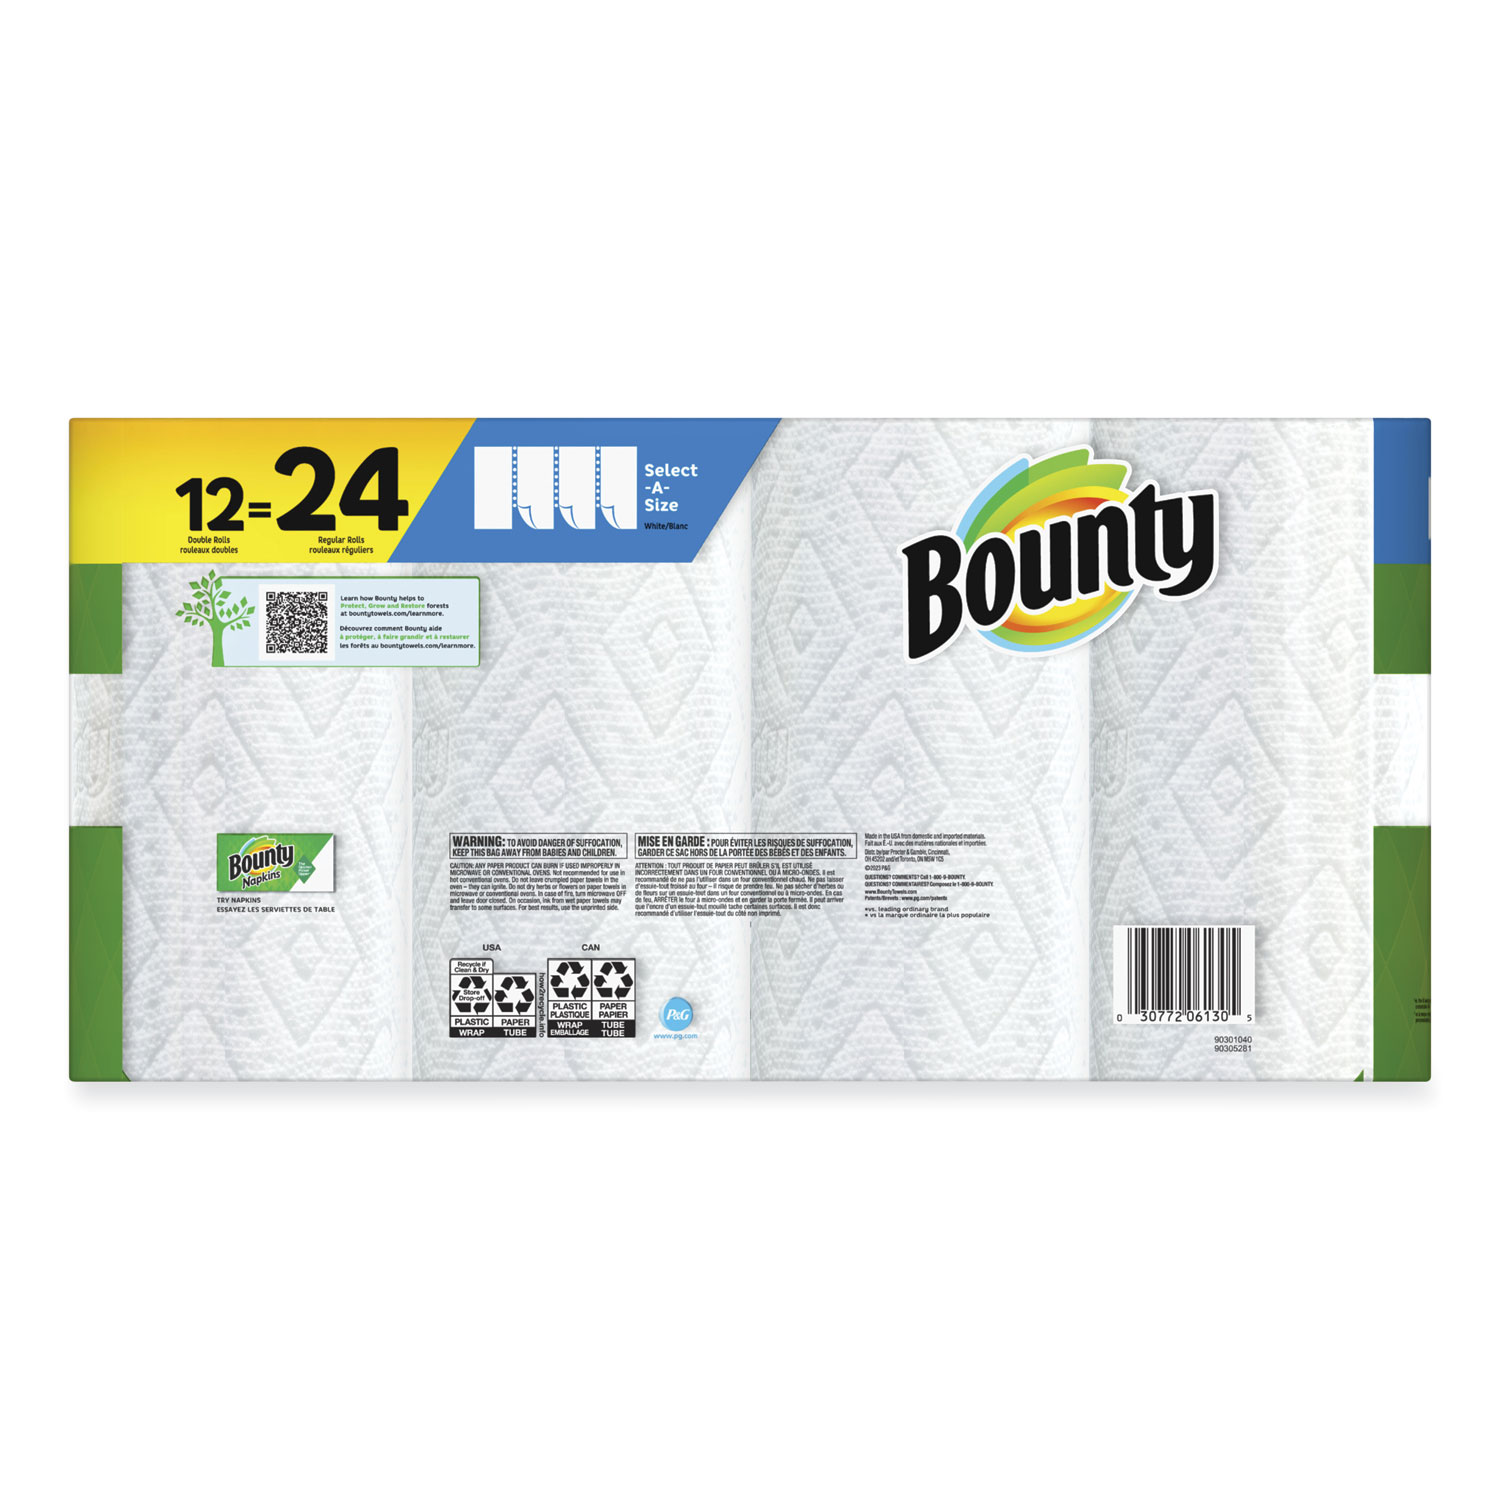 Procter & Gamble Bounty Kitchen Roll Paper Towels, 2-Ply, White, 10.5 x  11, 87 Sheets/Roll, 4 Triple Rolls/Pack, 6 Packs/Carton, PGC06109